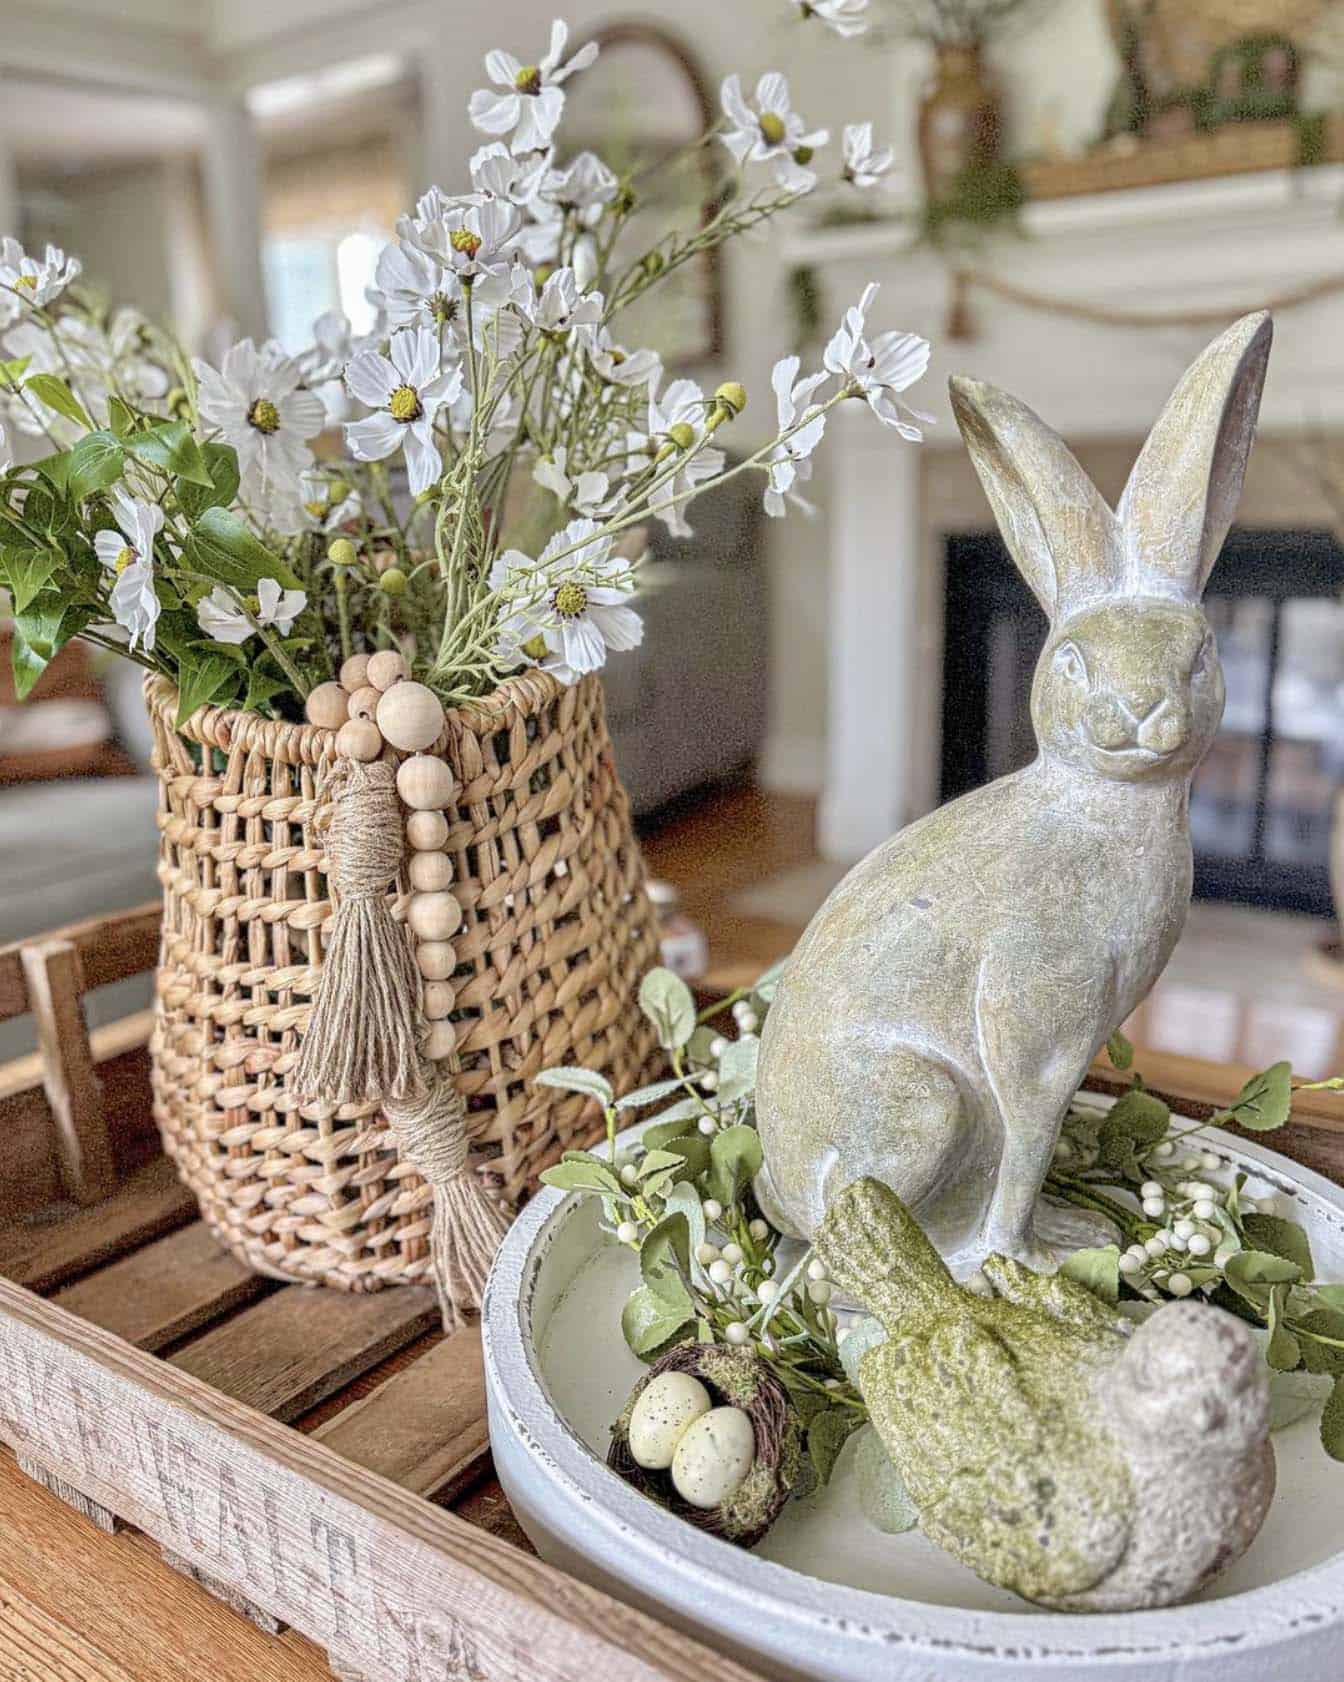 spring vignette with a bunny and vase of faux flowers on a tray